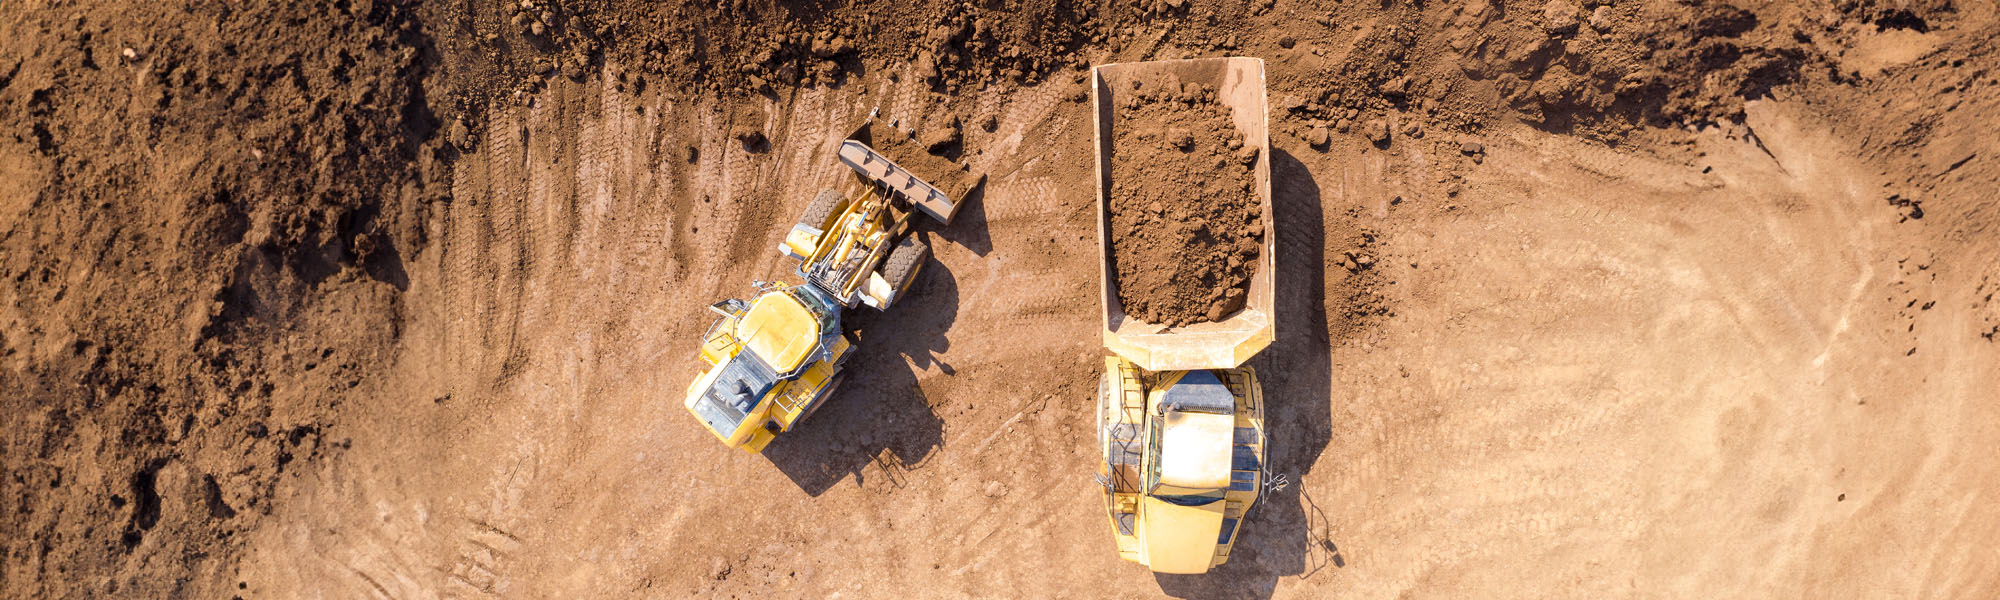 excavator loading soil onto an articulated hauler